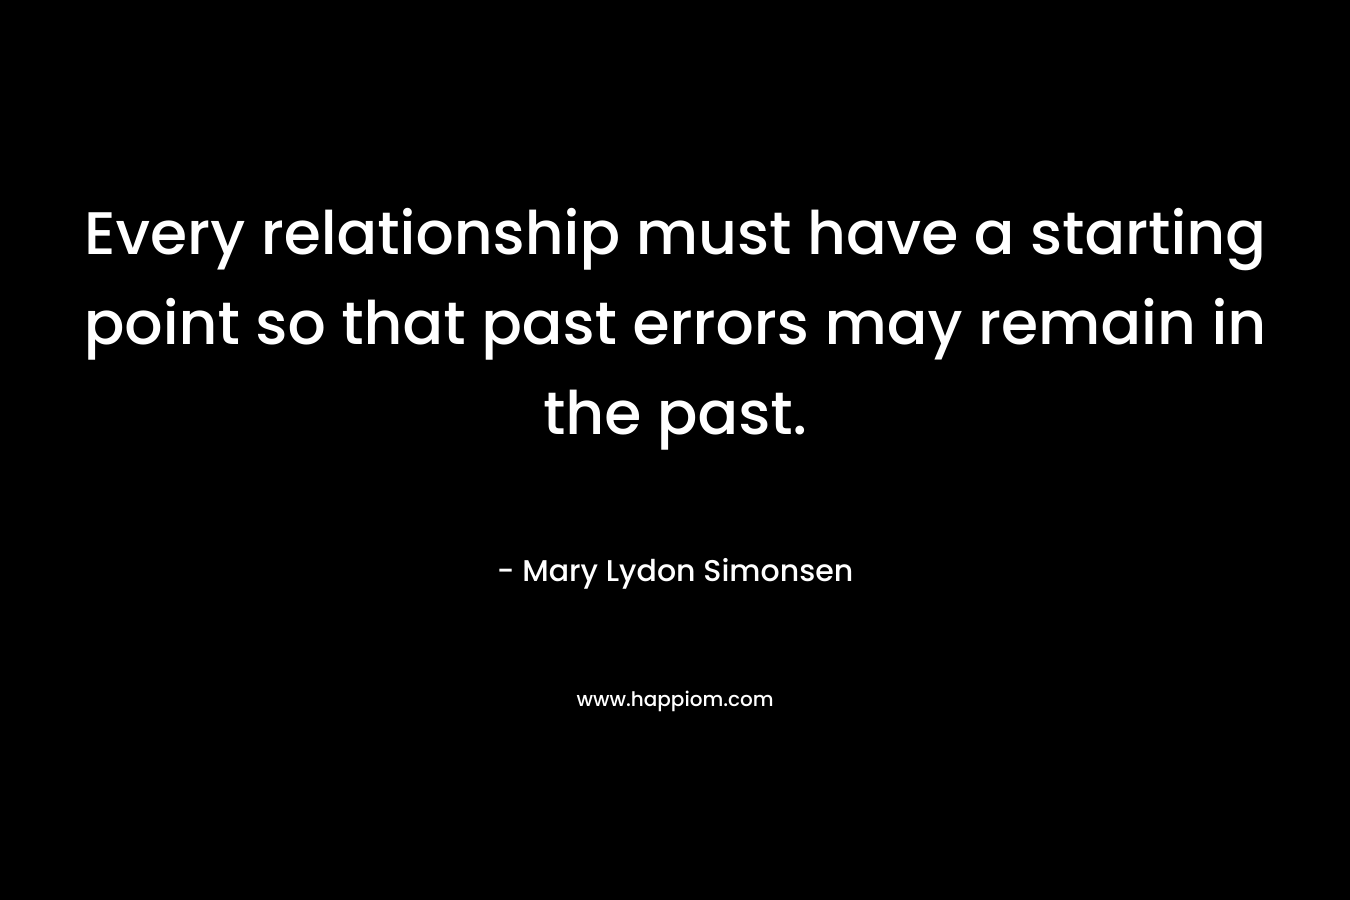 Every relationship must have a starting point so that past errors may remain in the past.